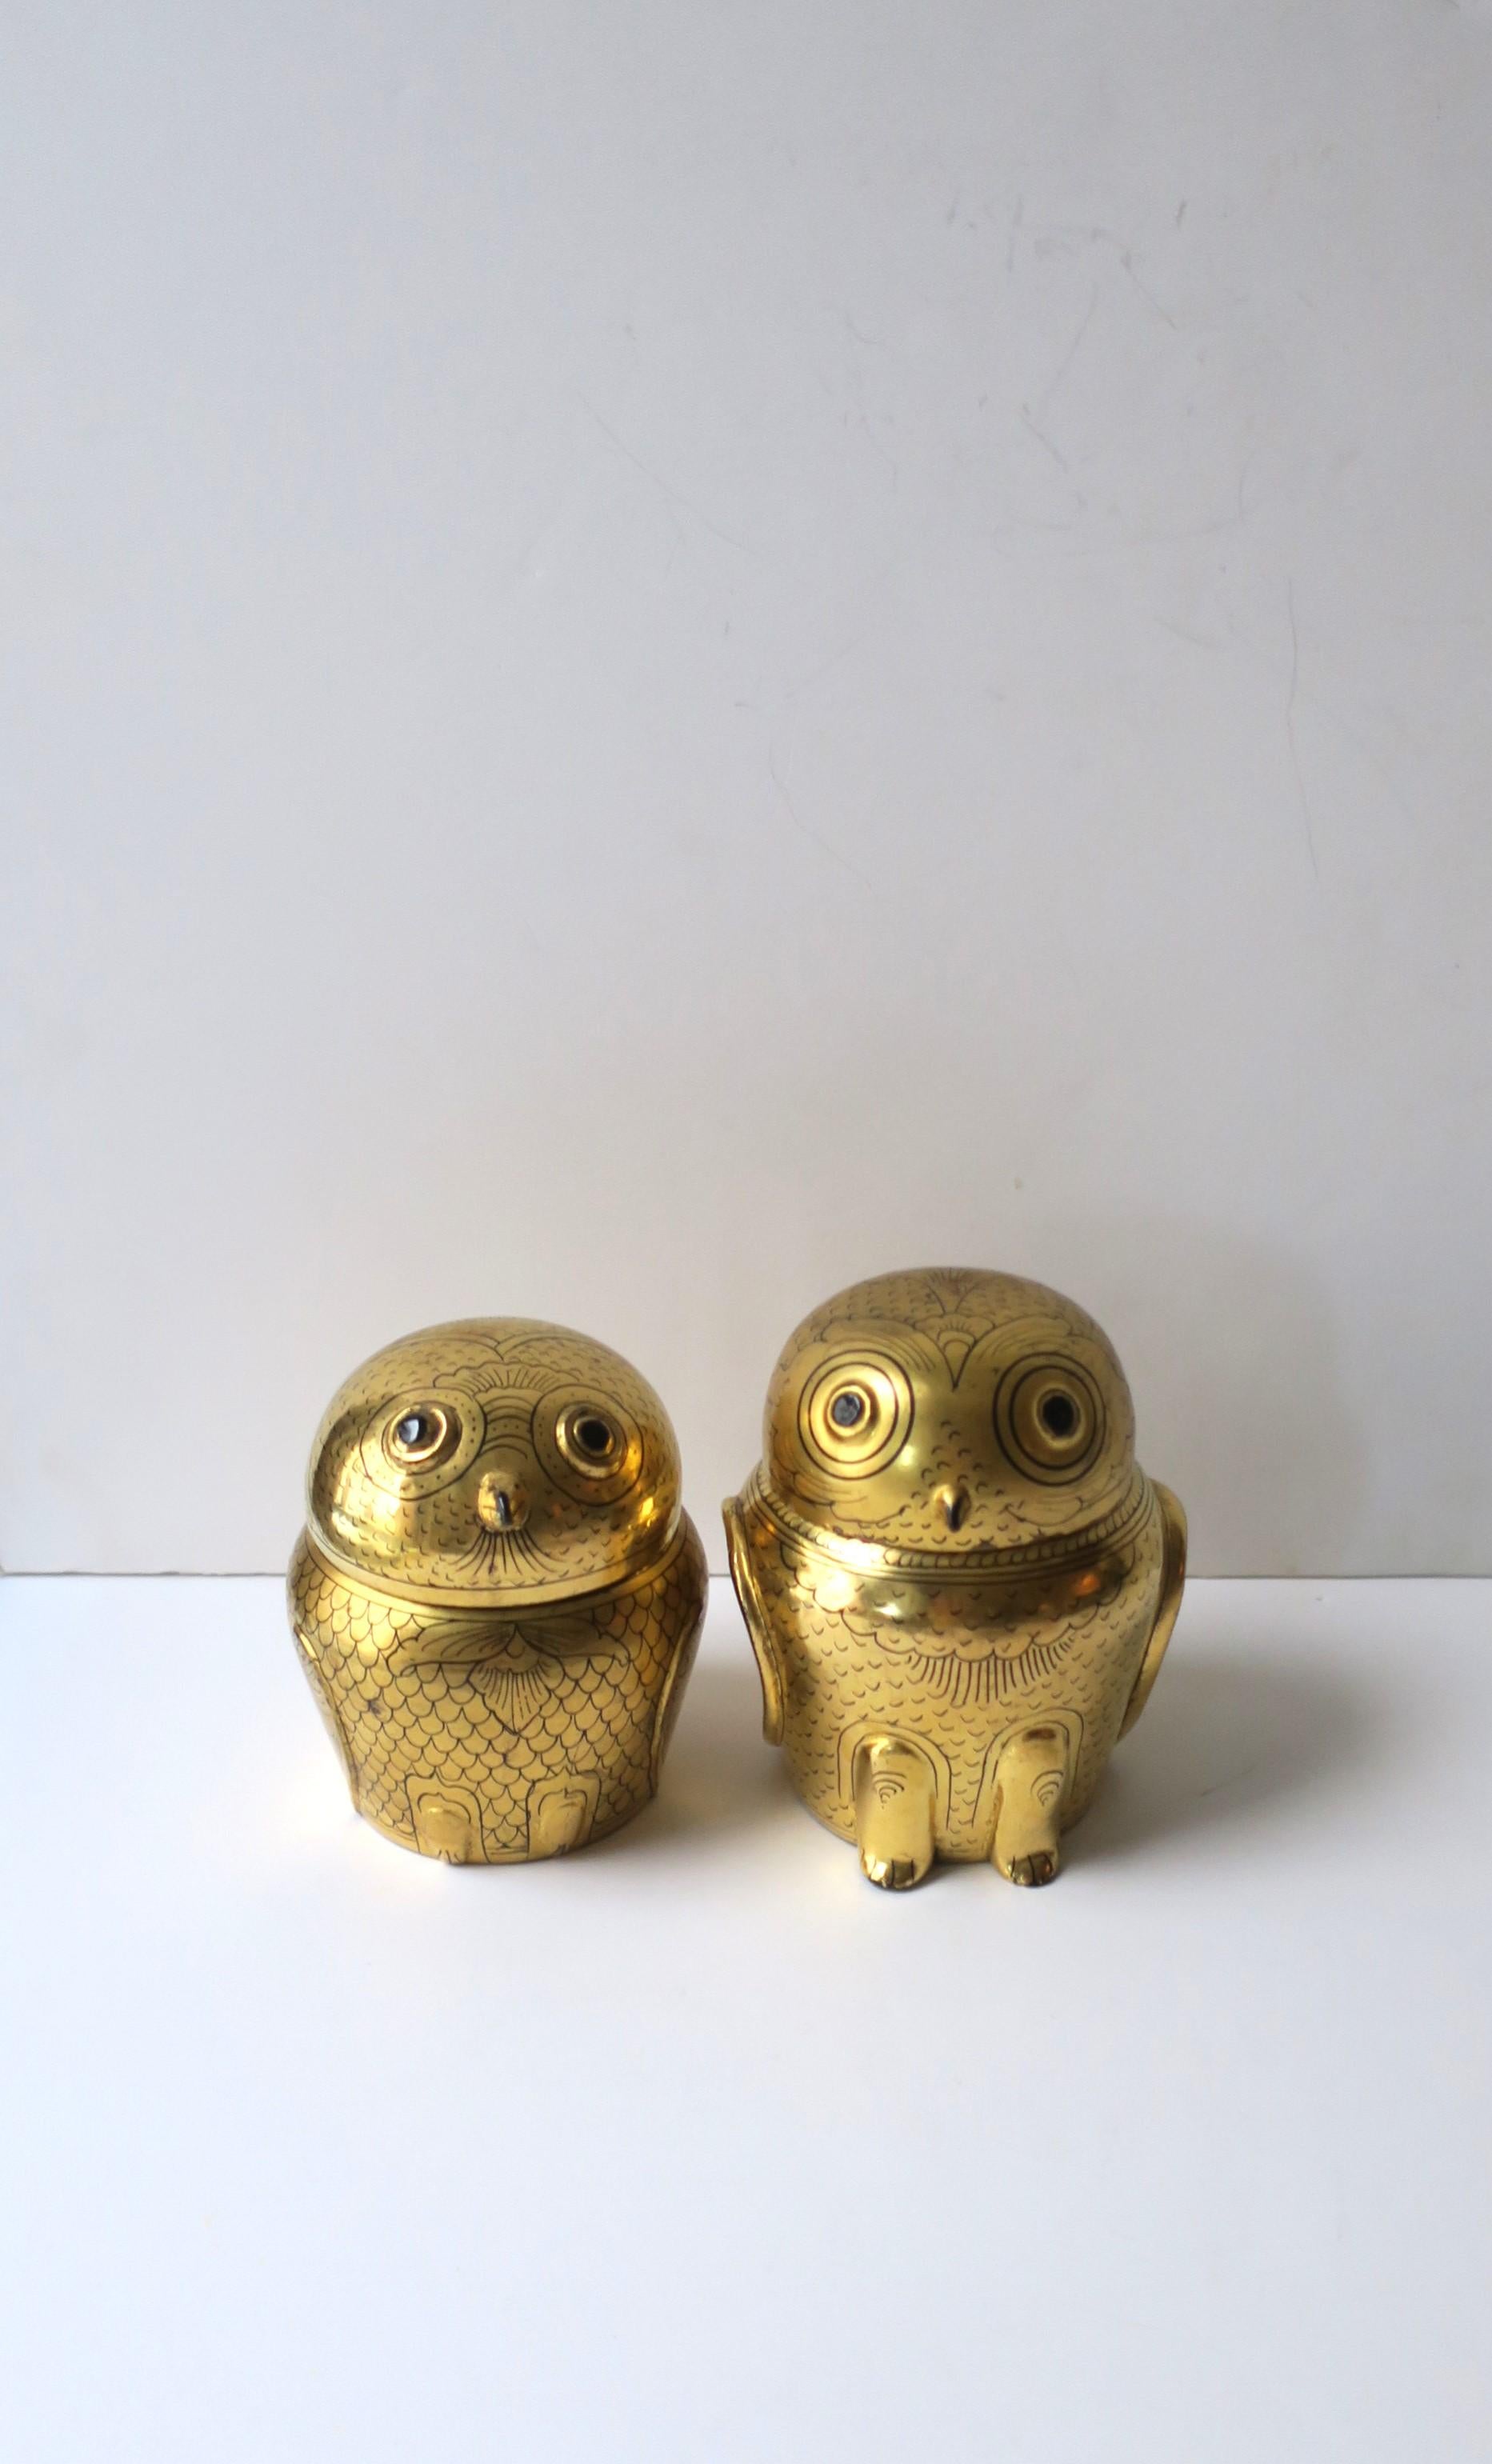 A set/pair of two (2) Burmese gold box owls, circa mid to late-20th century, 1980s, Burma. A beautiful set of two owl boxes with gold foil overlay on wood with black lacquer interior. Detailed eyes, beak, feet, and wings. Great decorative objects or